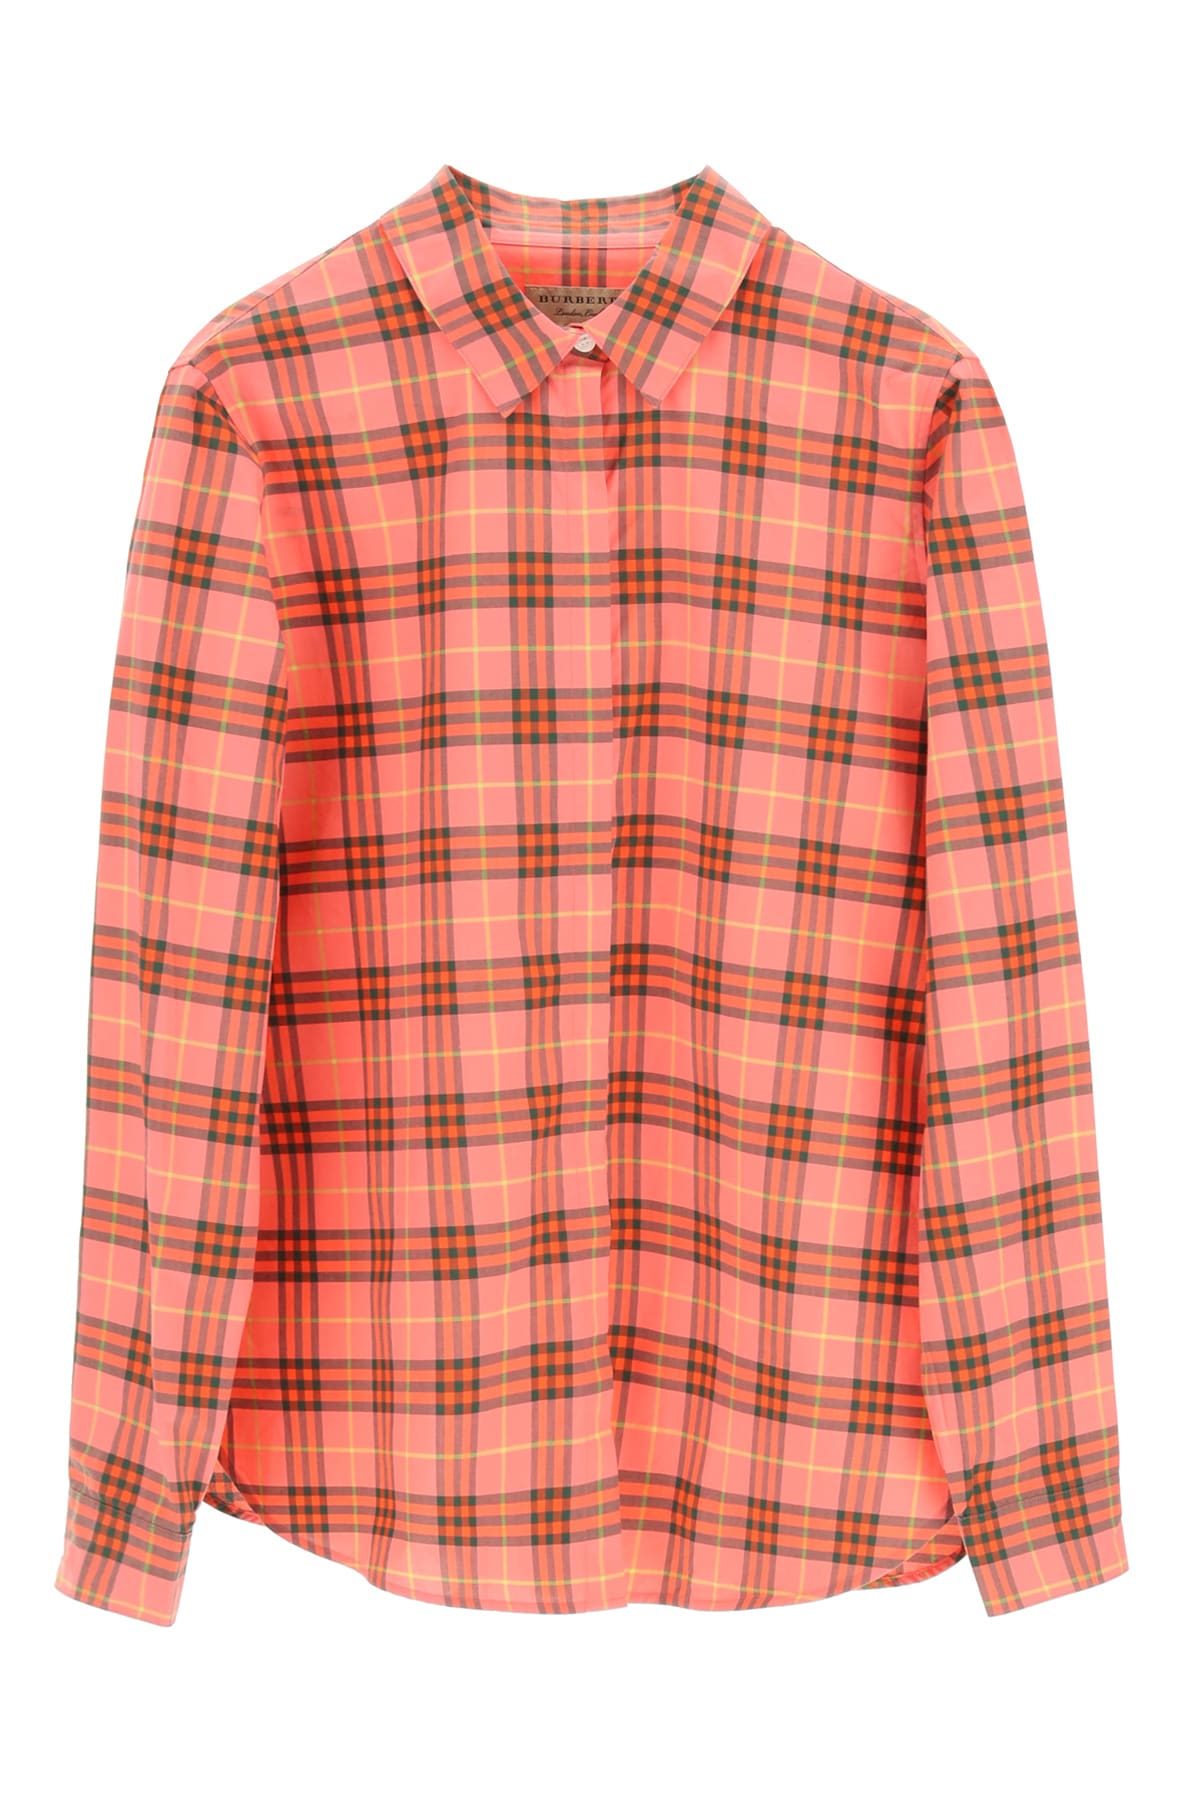 Burberry Tartan Shirt In Coral Red Ip Check (pink)